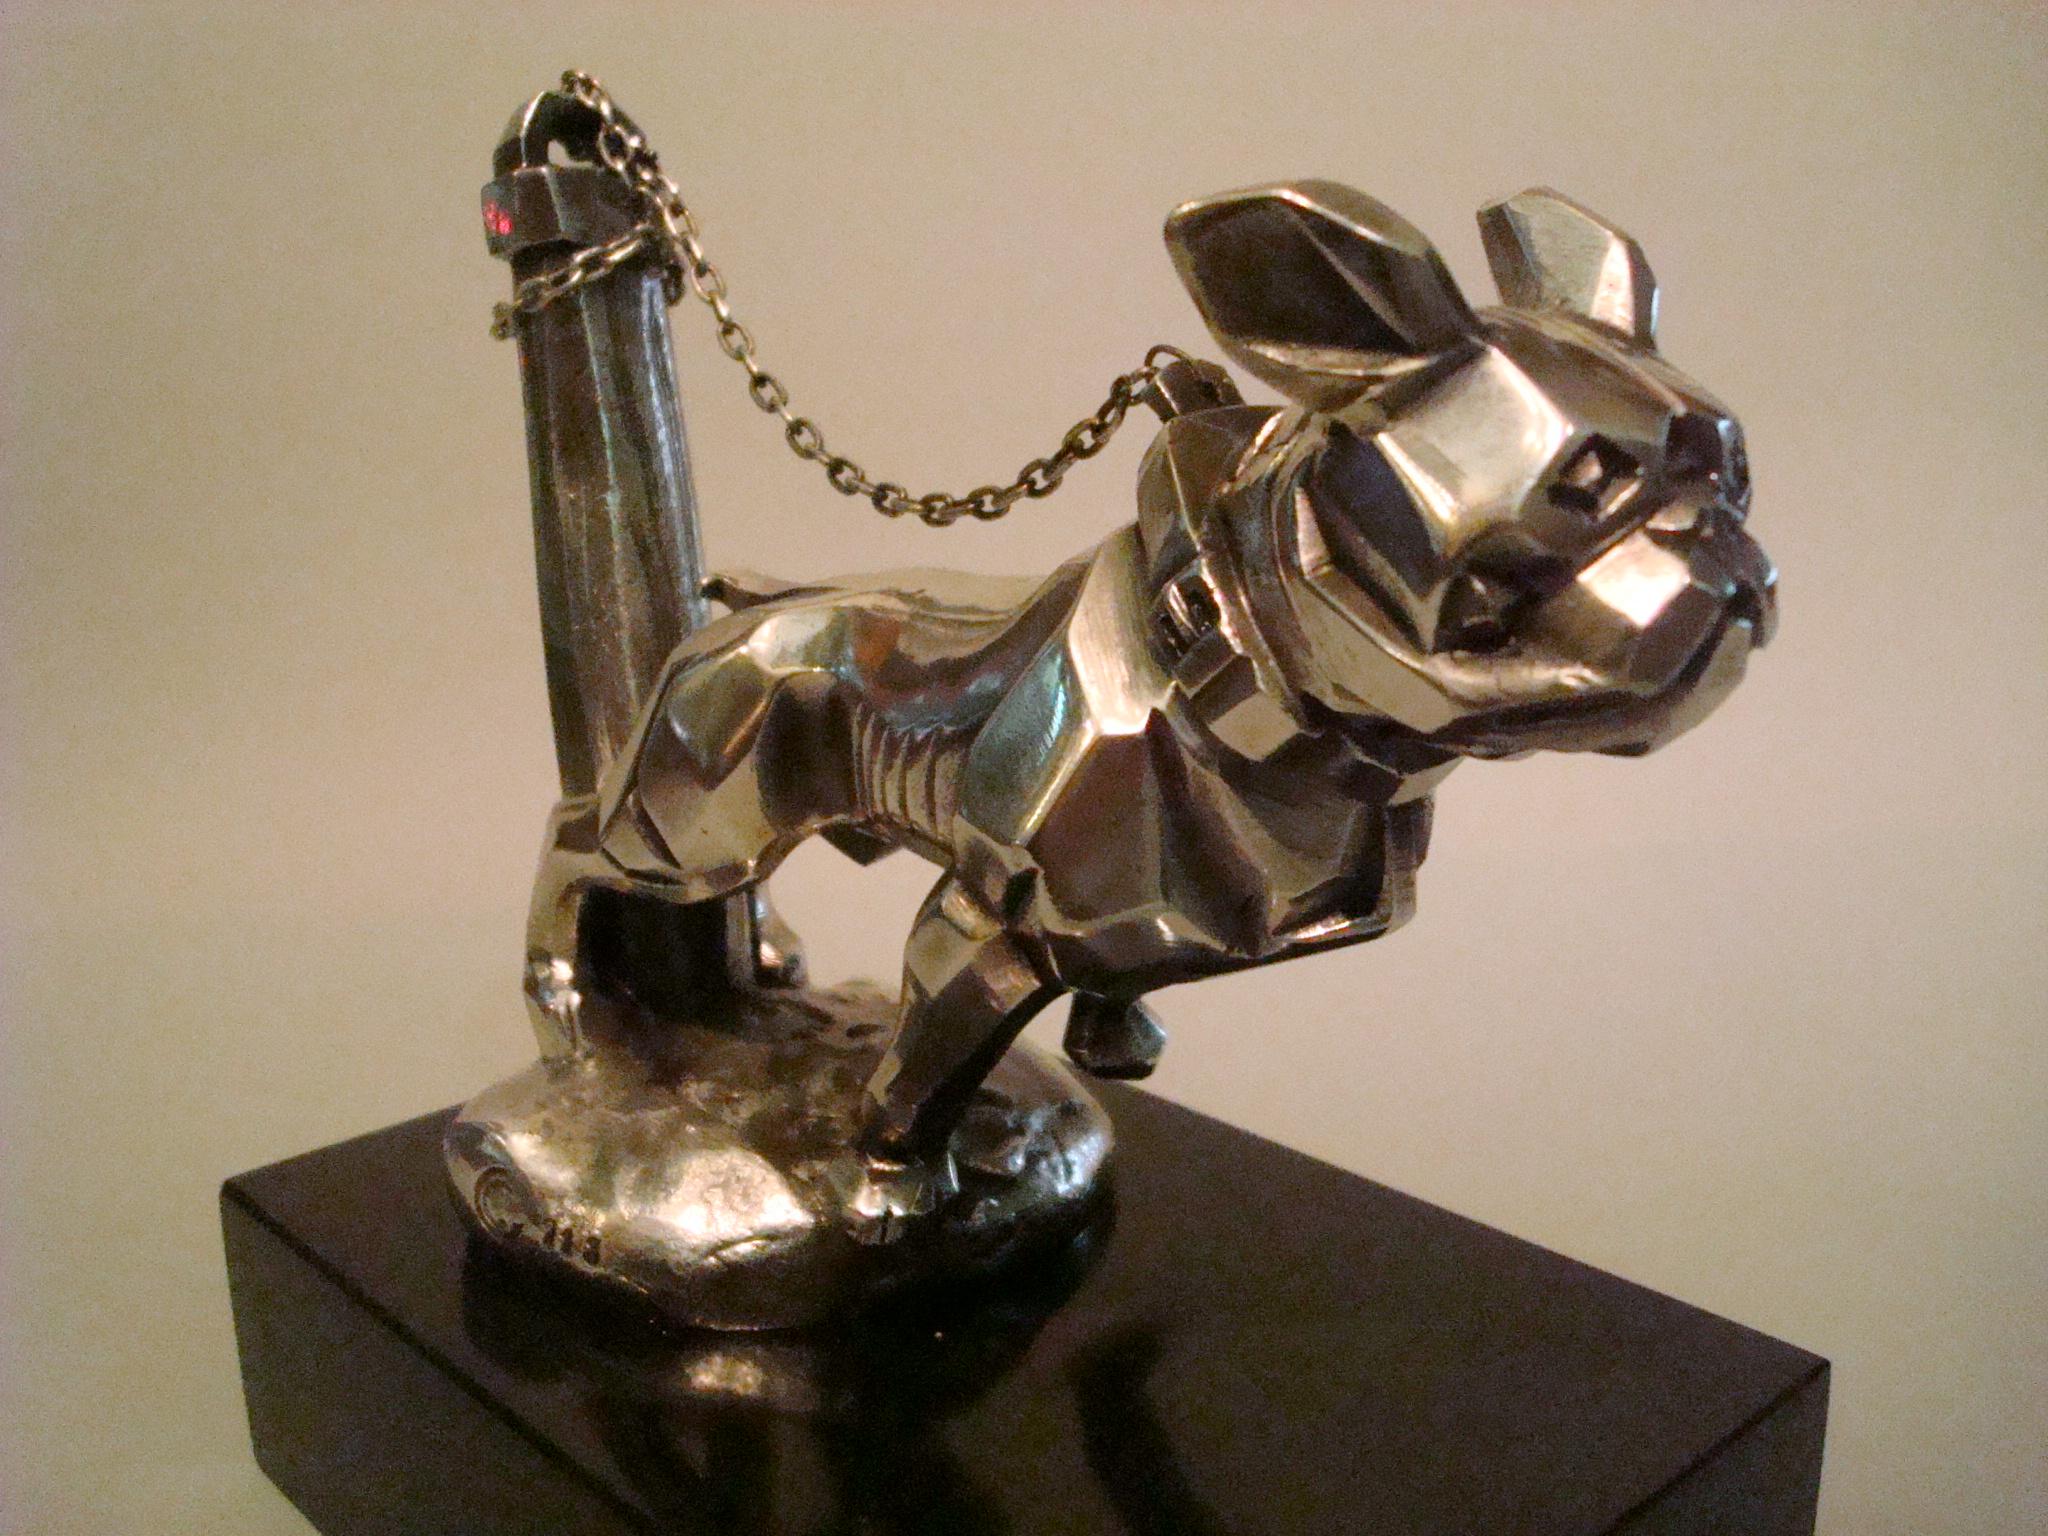 Art Deco 'Chained Bulldog' Car Mascot / Hood Ornament by Marvel, French, 1920´s,
marked with foundry stamp number 213, silver-plated bronze, large version, 14cm long, complete with chain. Very nice desk piece of Automobilia.

Some info on the